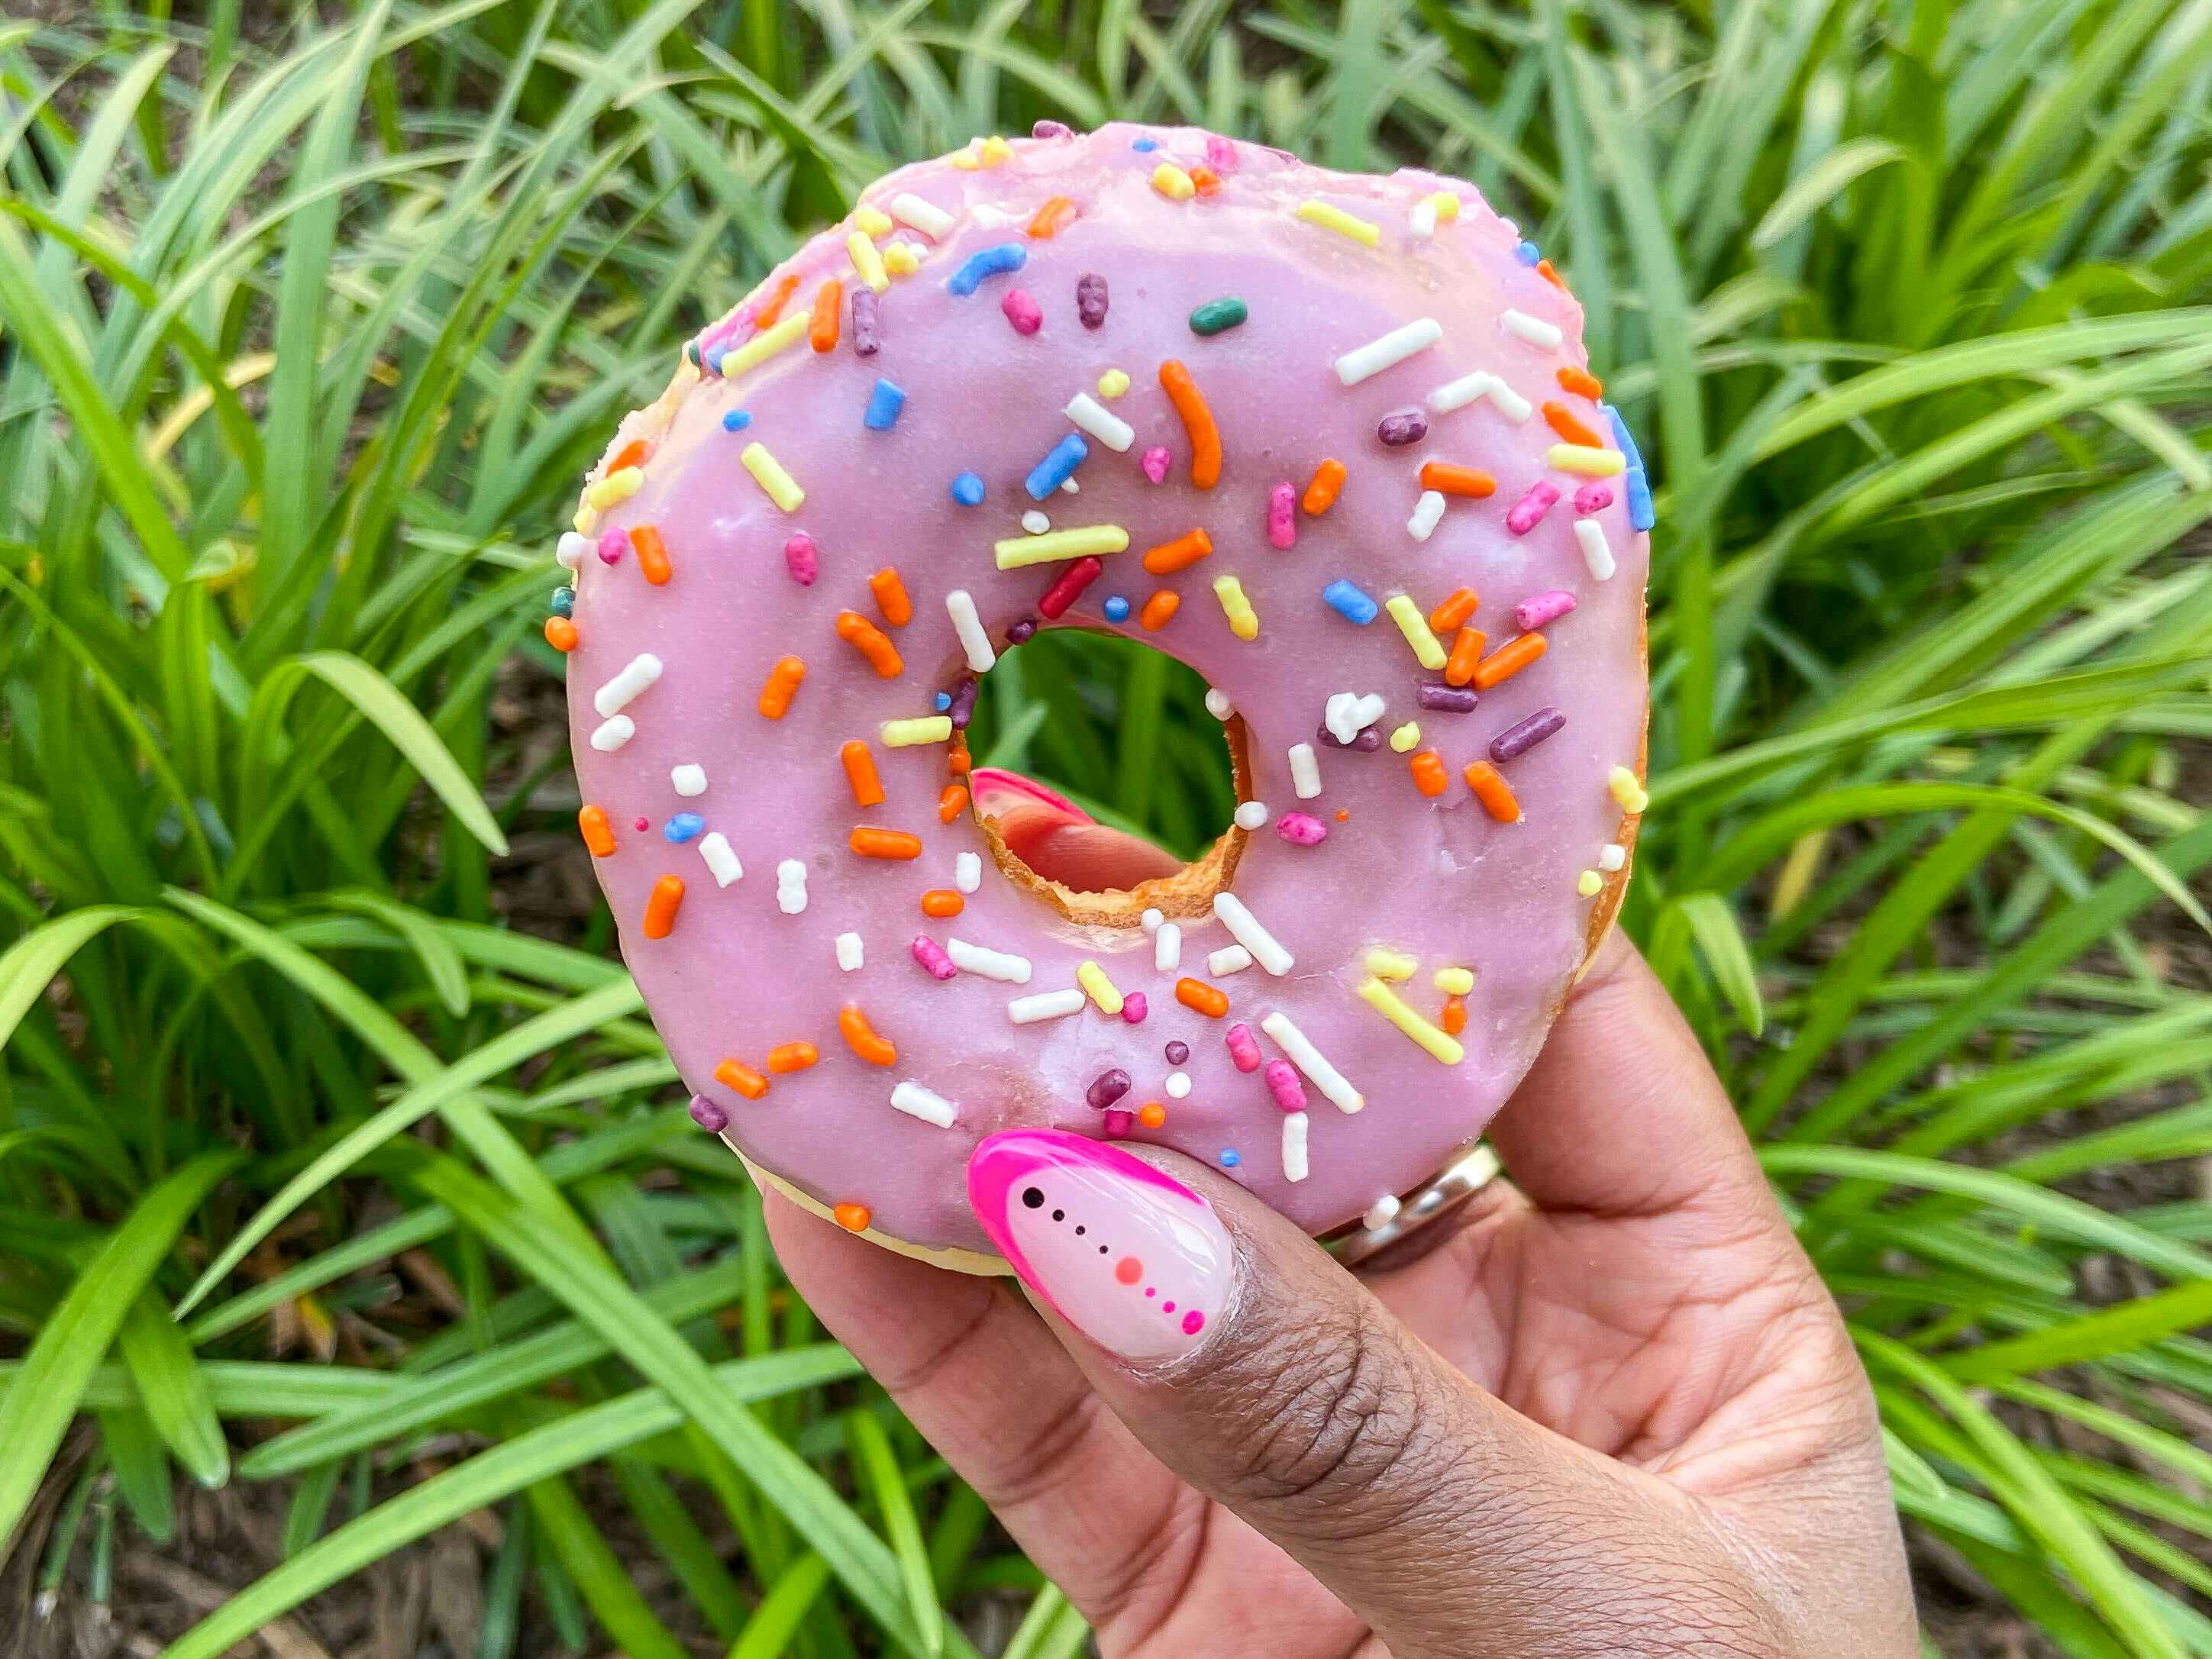 A donut held out by hand in front of grass.